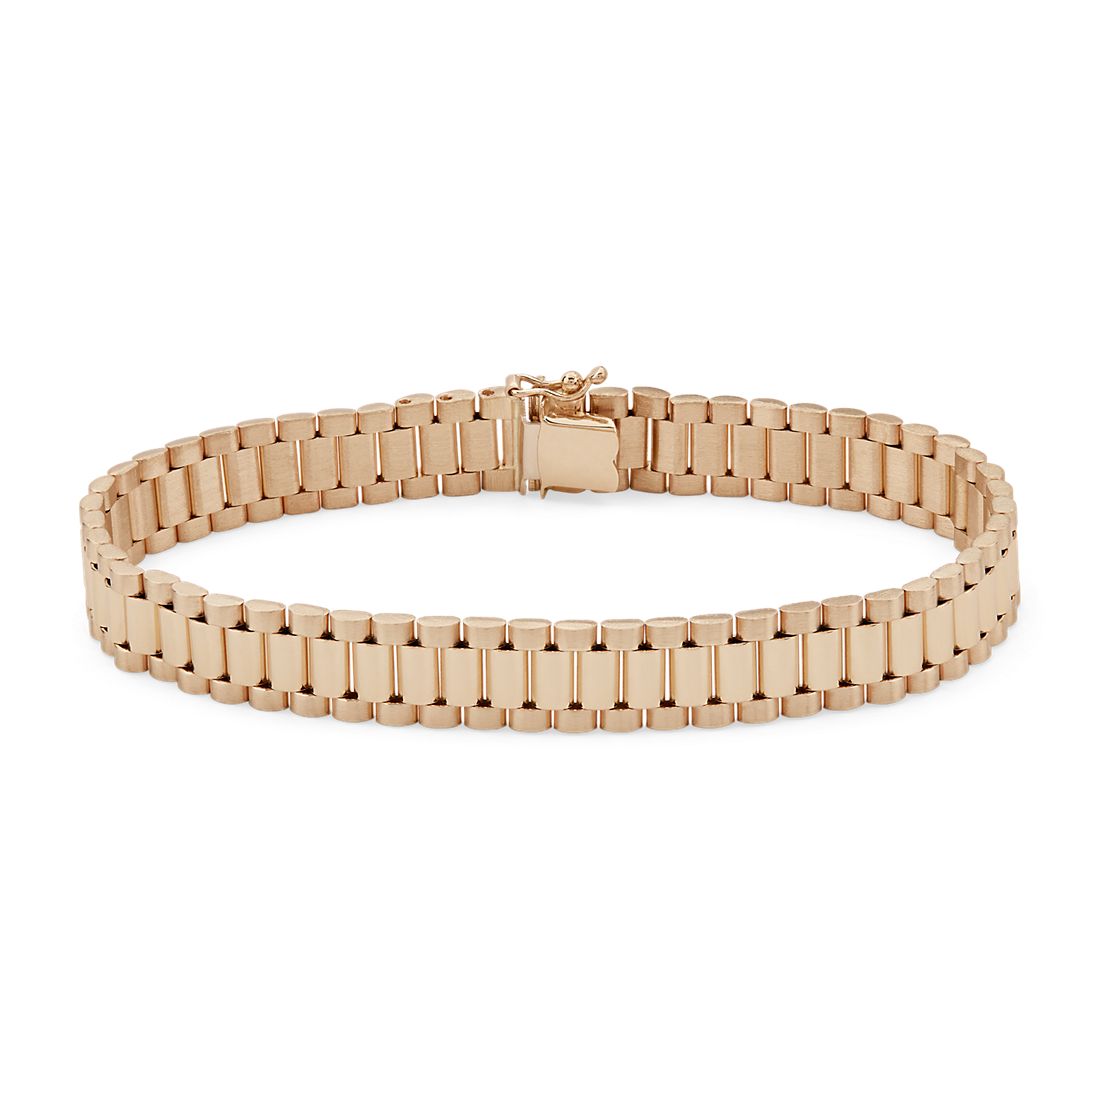 8.5" Men's Brushed and Polished Link Bracelet in 14k Yellow Gold